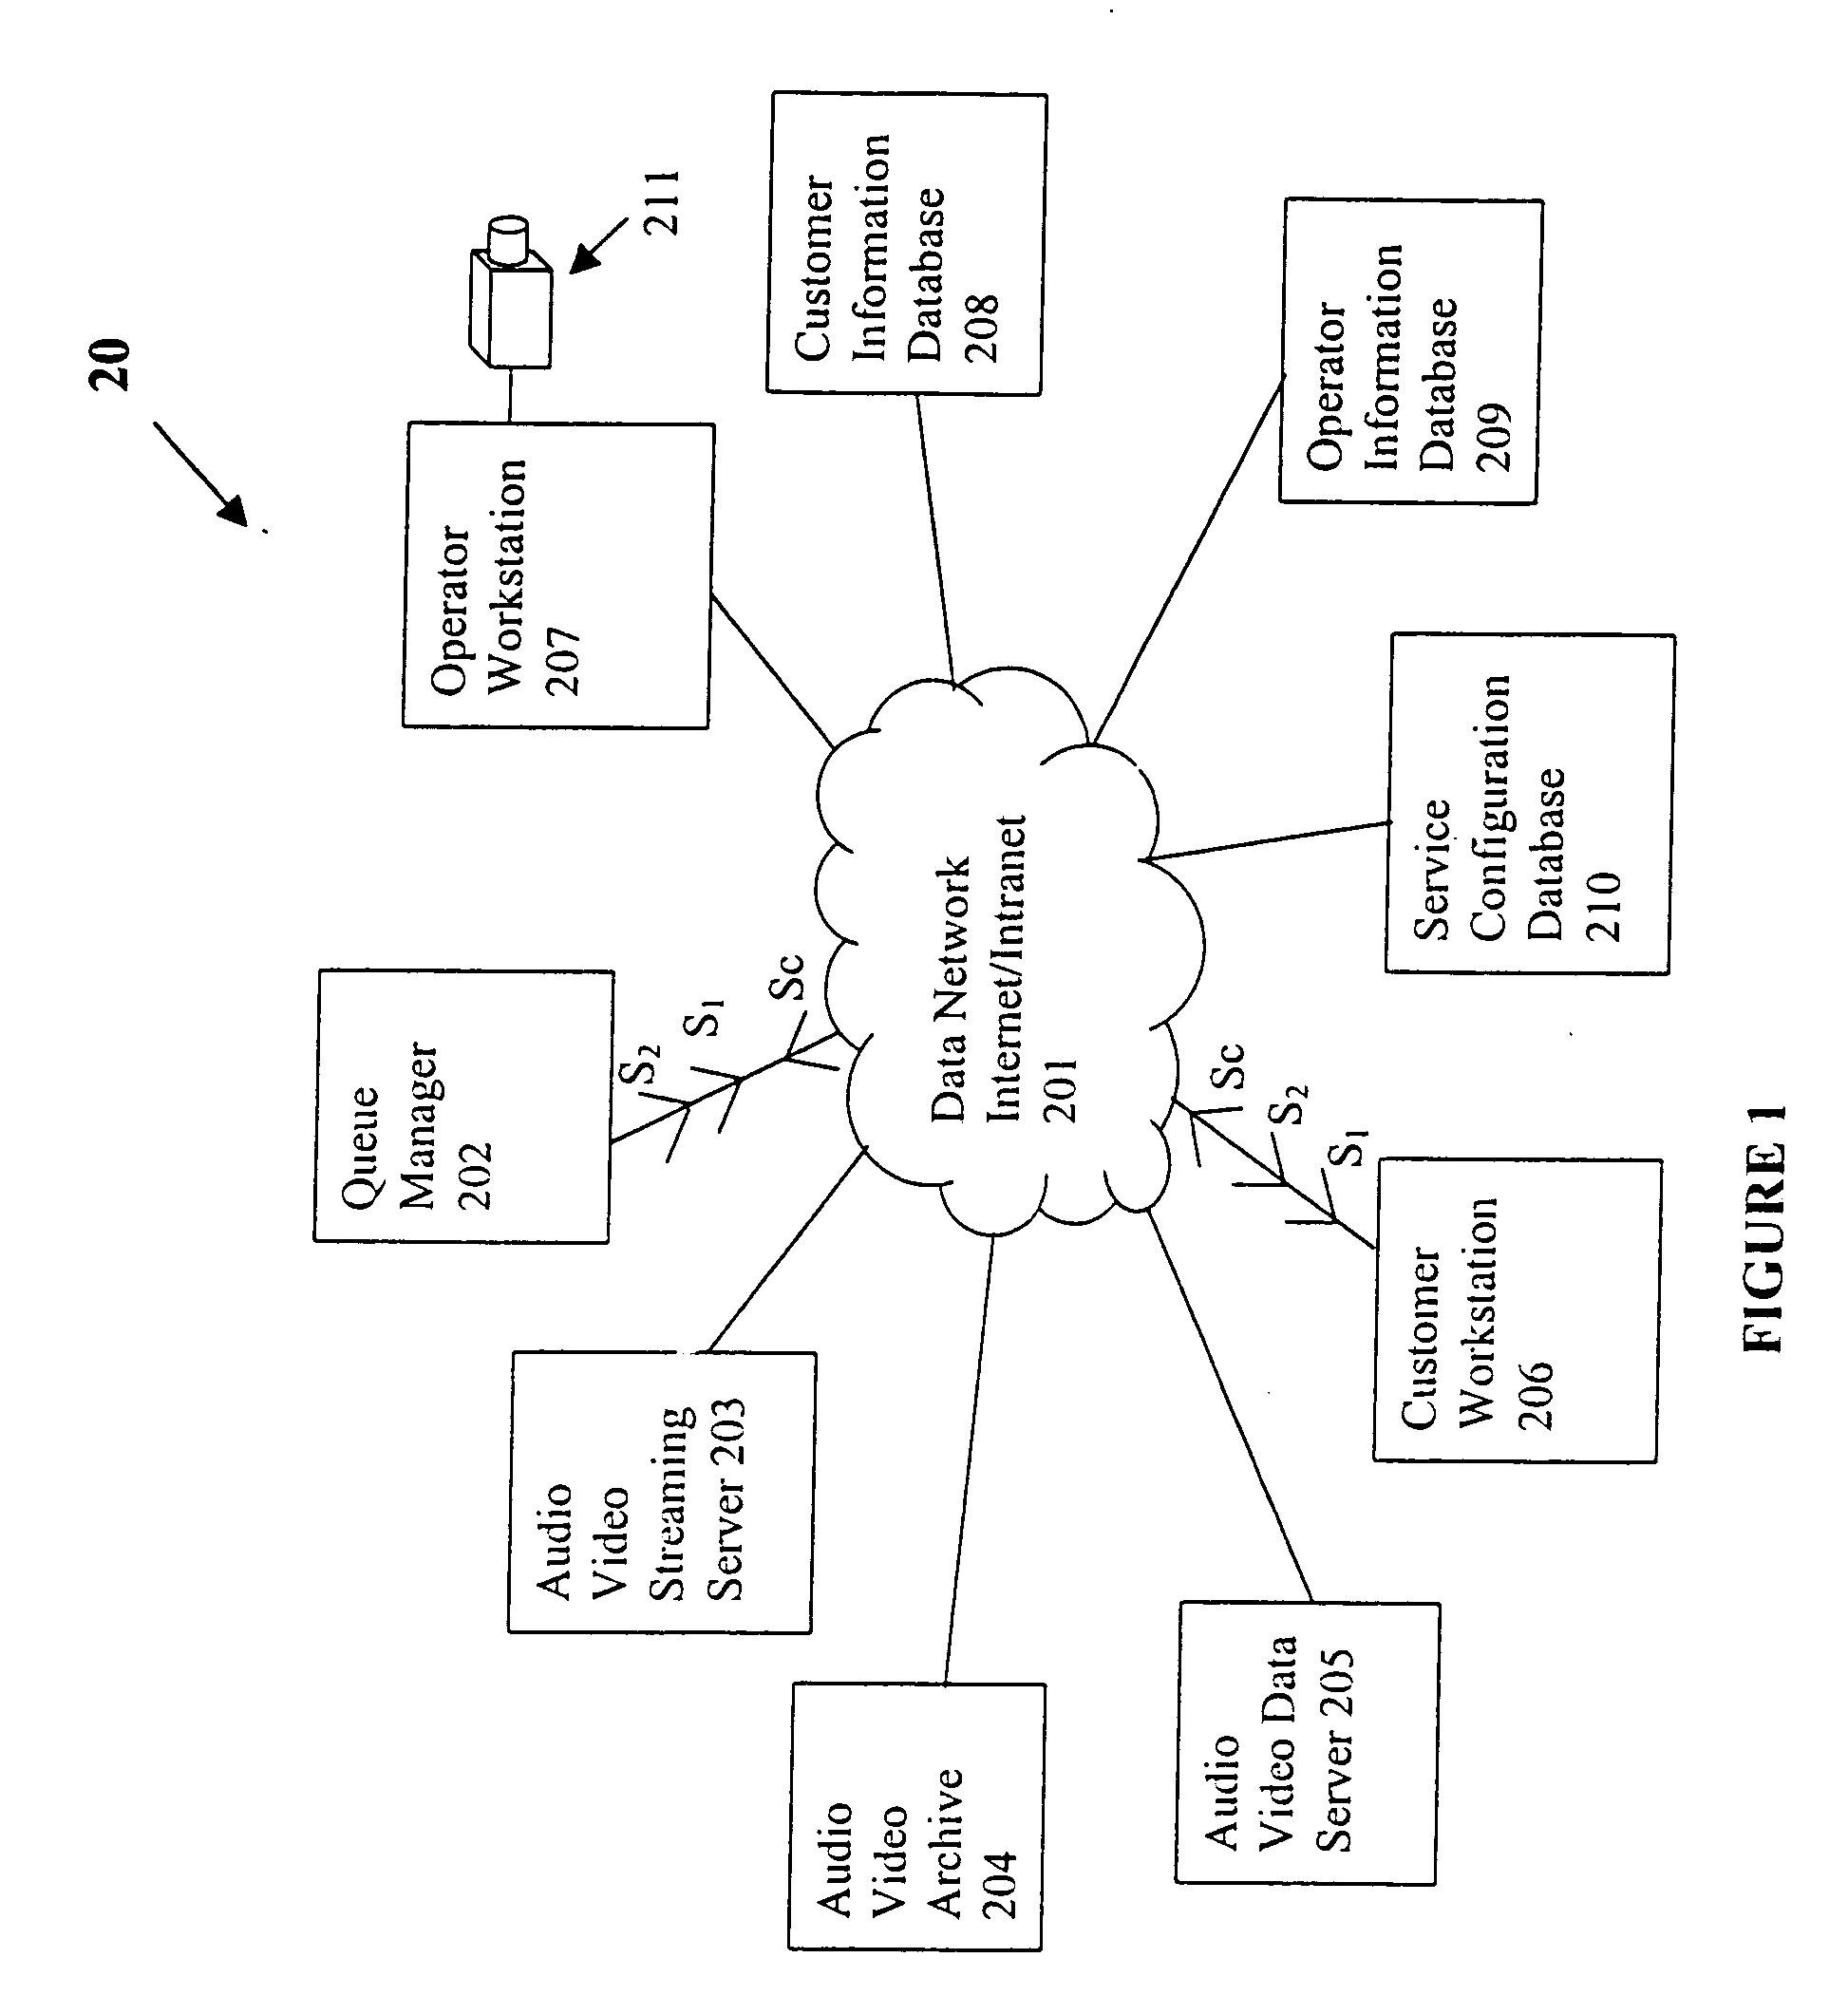 Device and system to facilitate remote customer-service